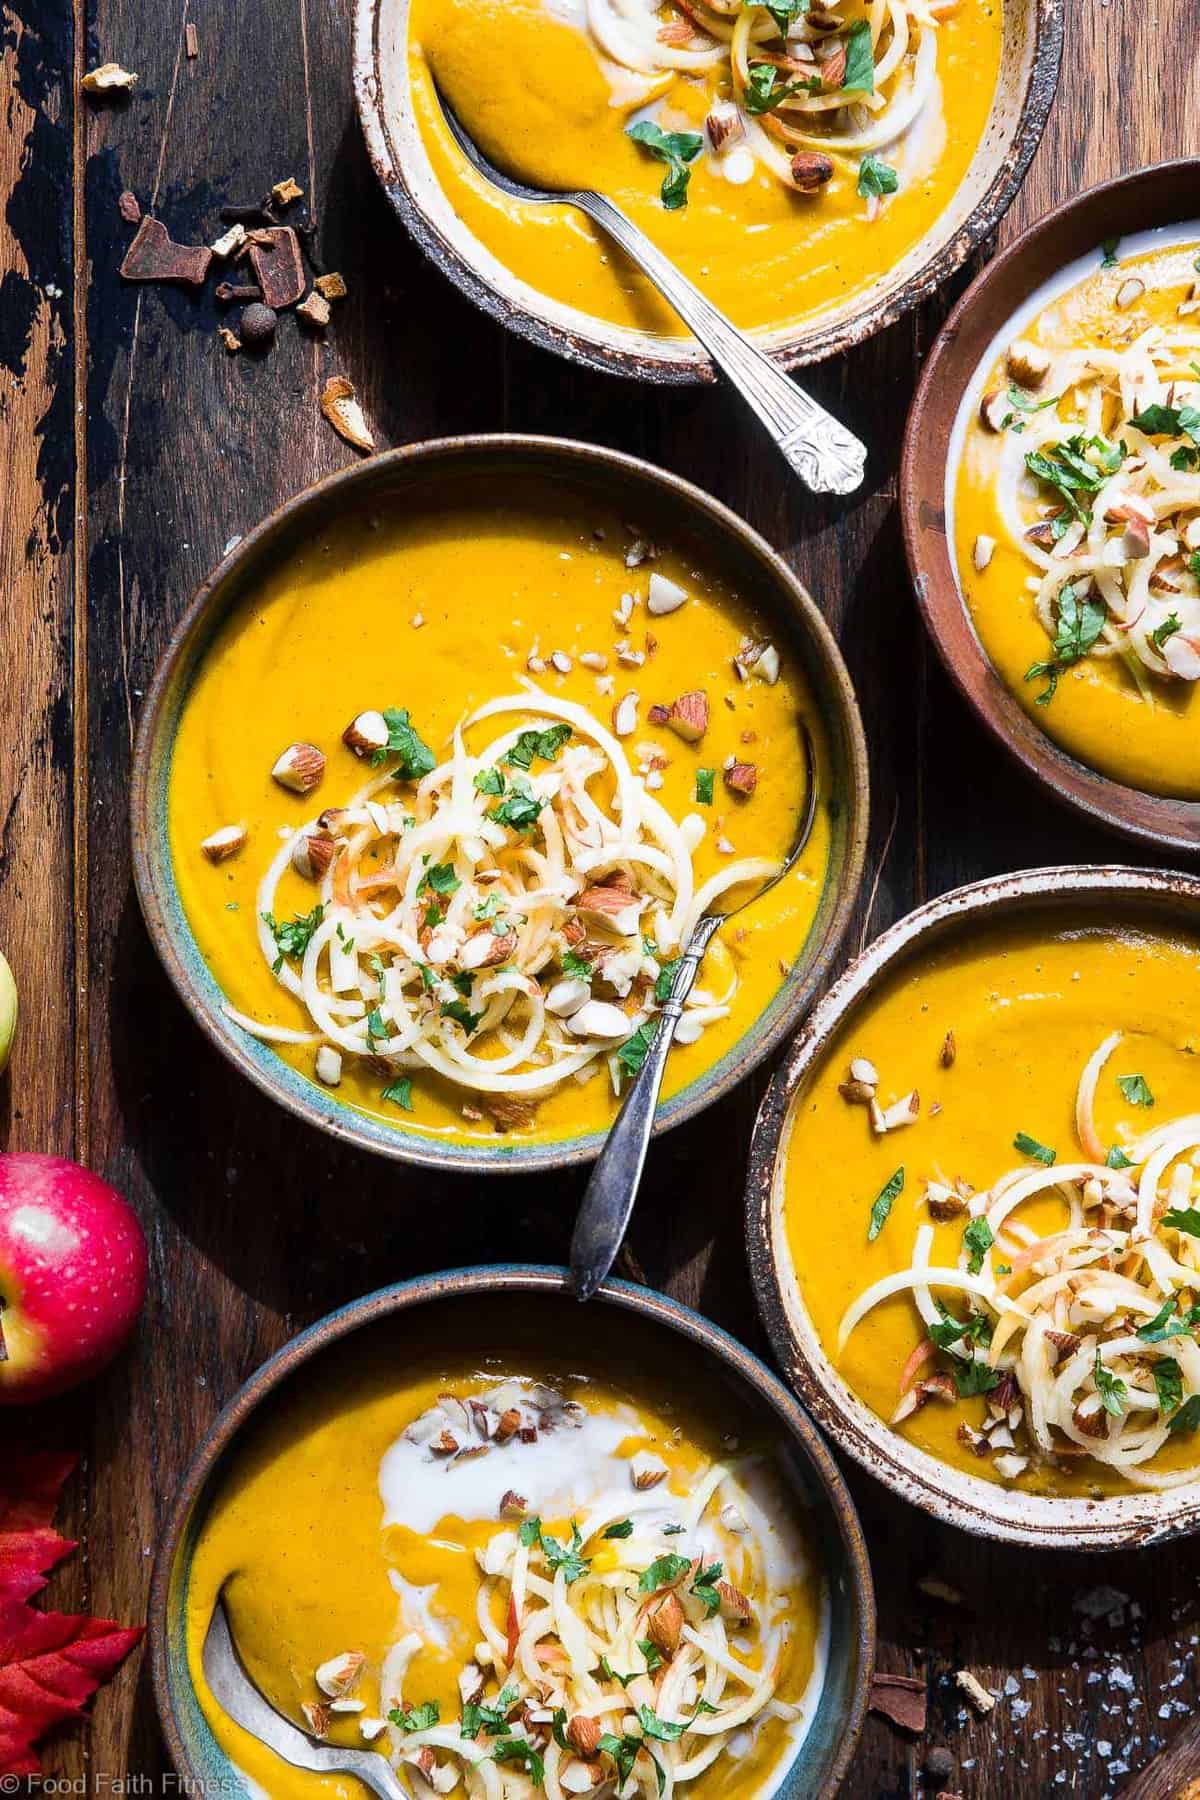 Slow Cooker Creamy Fall Vegan Sweet Potato Soup - this healthyÂ sweet potato soup is made in the slow cooker for an EASY weeknight dinner that is loaded with spicy-sweet, cozy flavor! Gluten free, paleo and SO creamy and delicious! | #Foodfaithfitness | #Paleo #Glutenfree #Vegan #Dairyfree #slowcooker